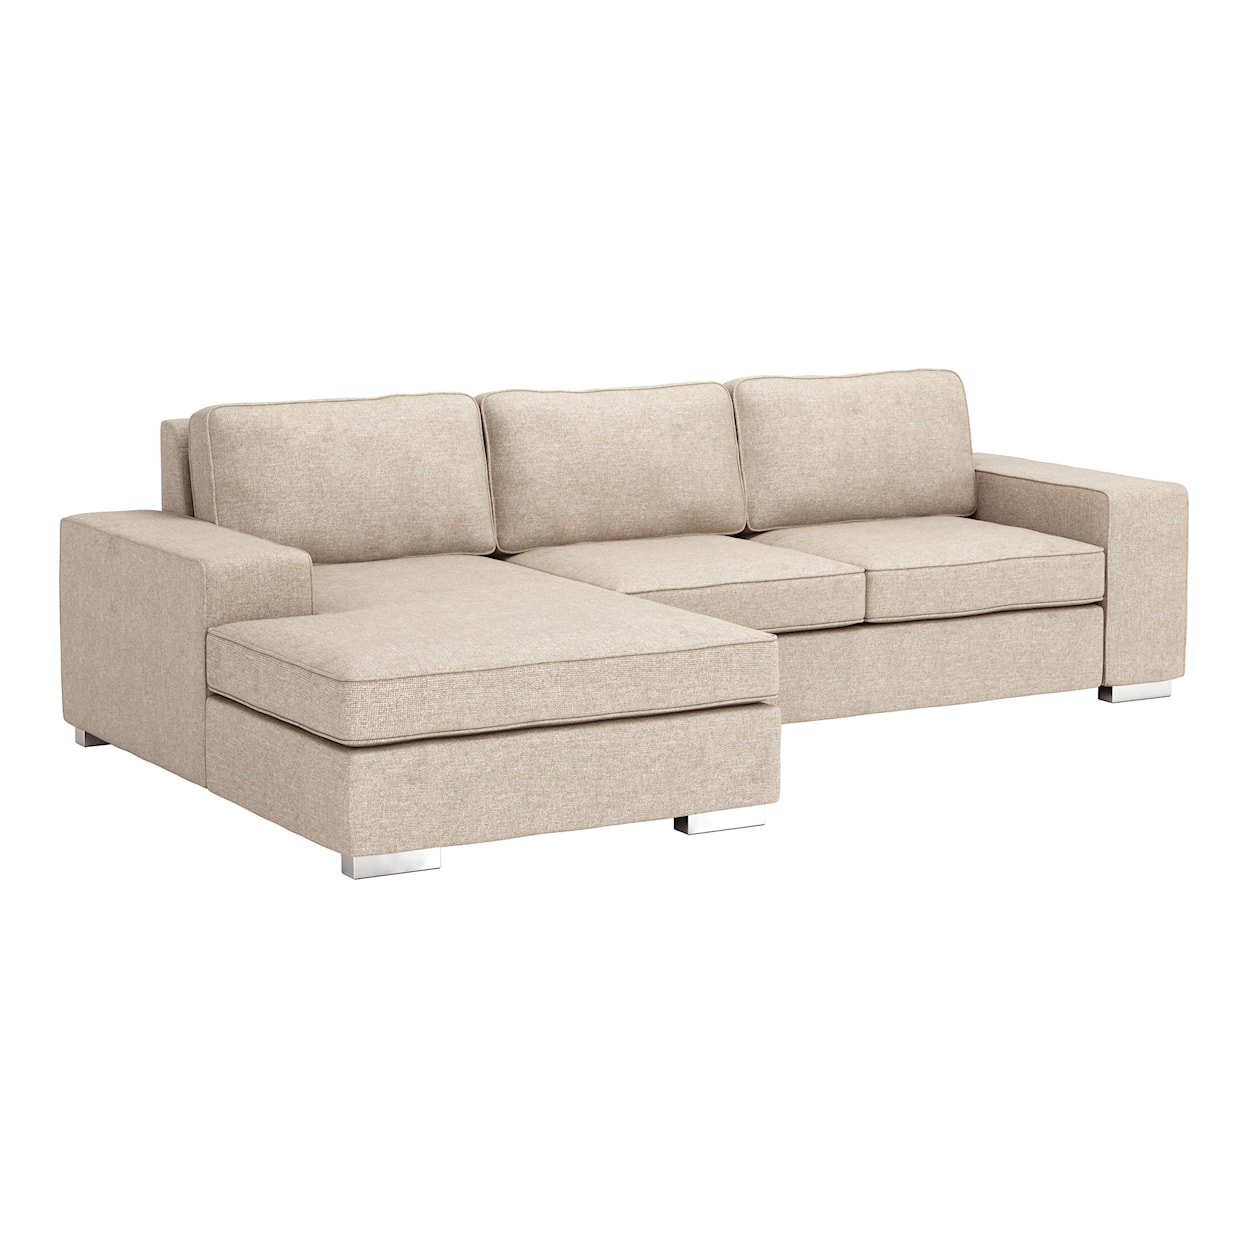 Zuo Brickell Sectional